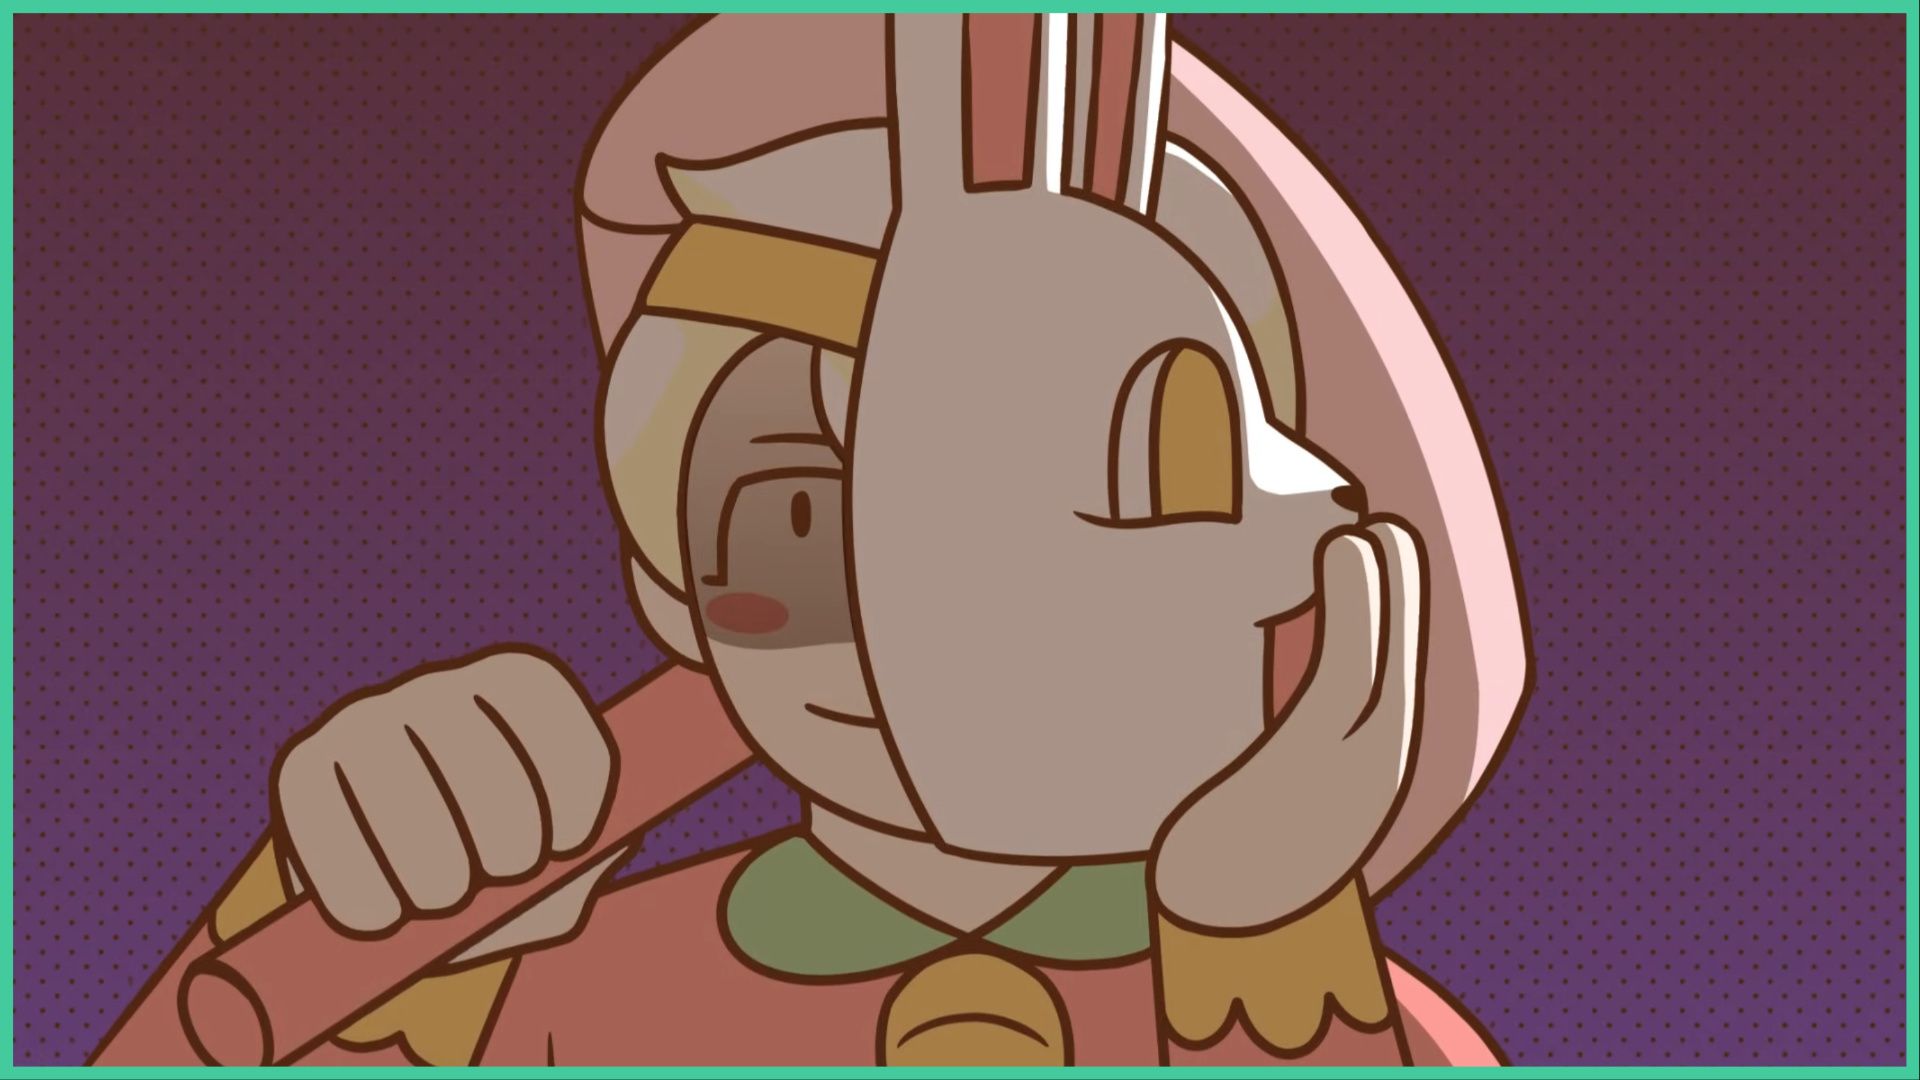 feature image for our bonnie's bakery news, the image features a screenshot from the game's trailer of bonnie holding a hammer over her shoulder with one hand, and holding a rabbit mask over half of her face as she smirks, with a shadow cast over her eyes